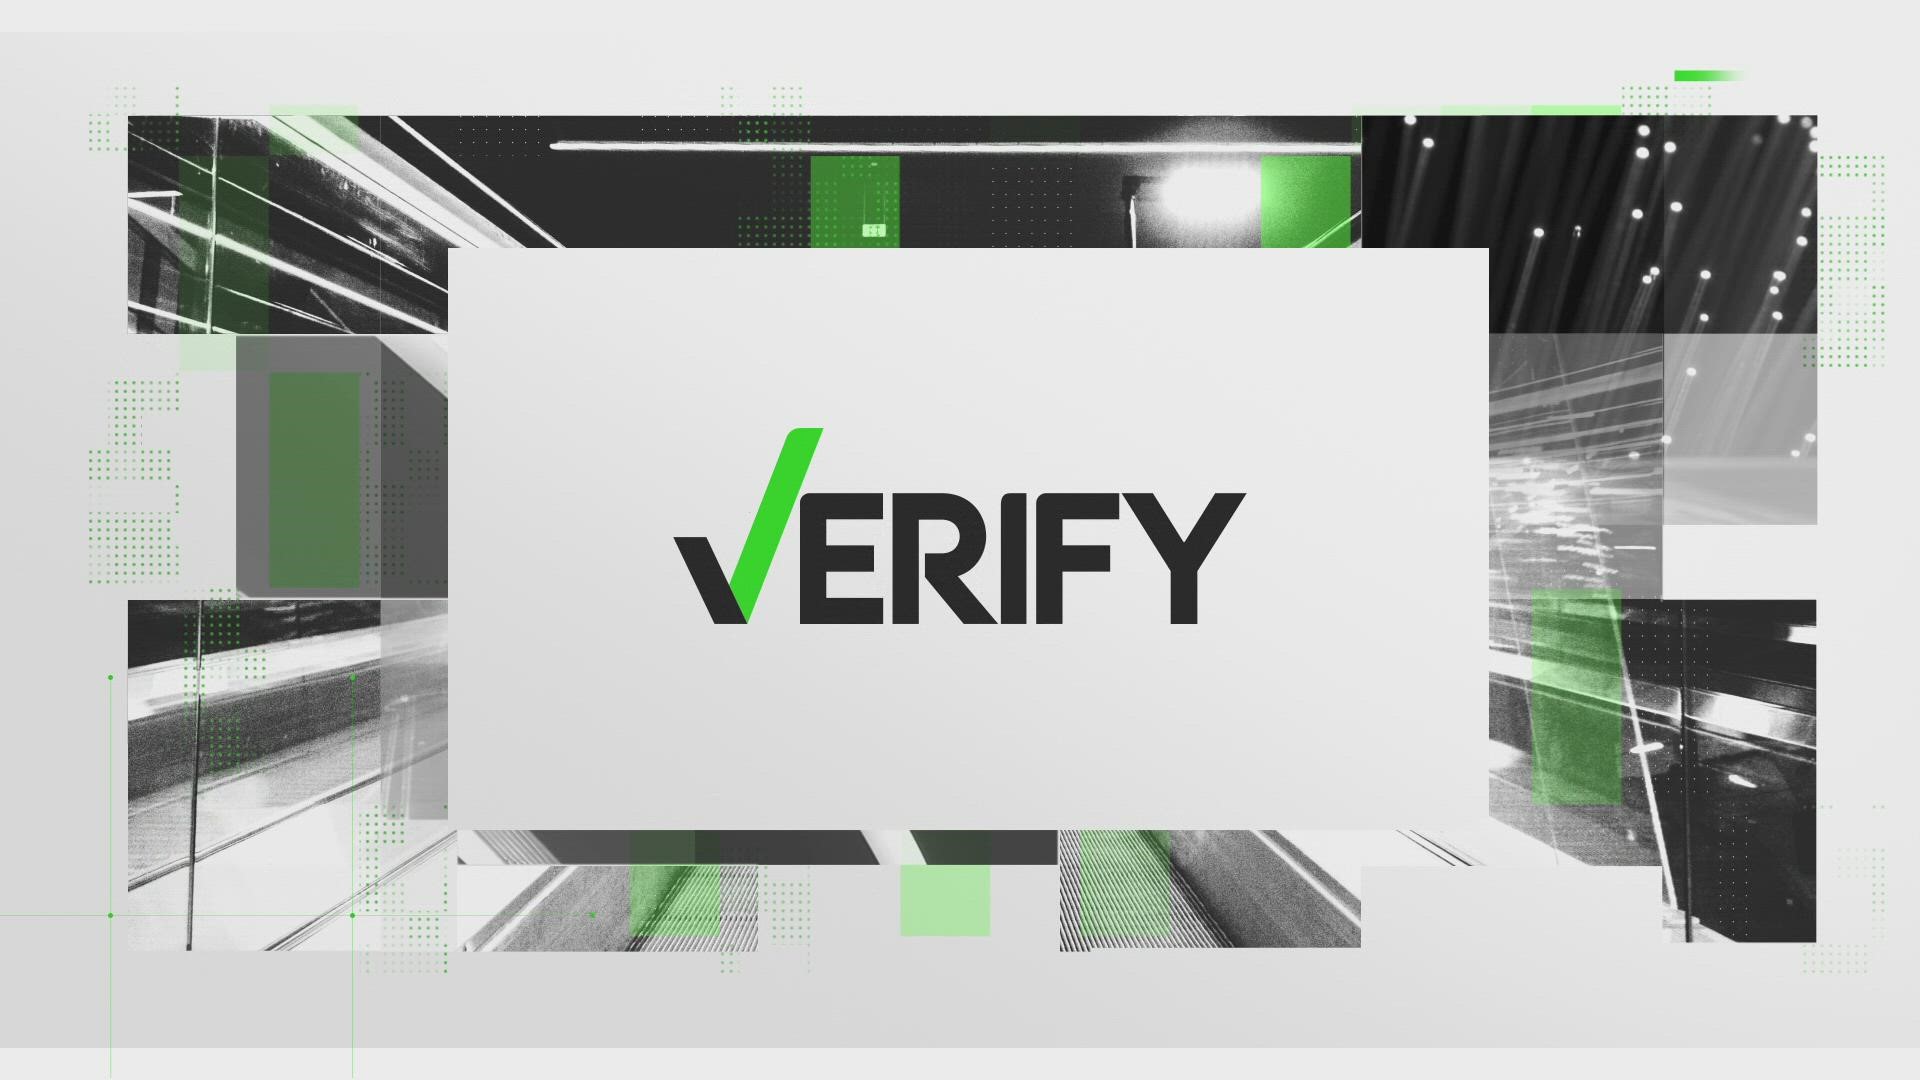 The Verify team looked into who pays for a COVID test if you are required to get one at work.